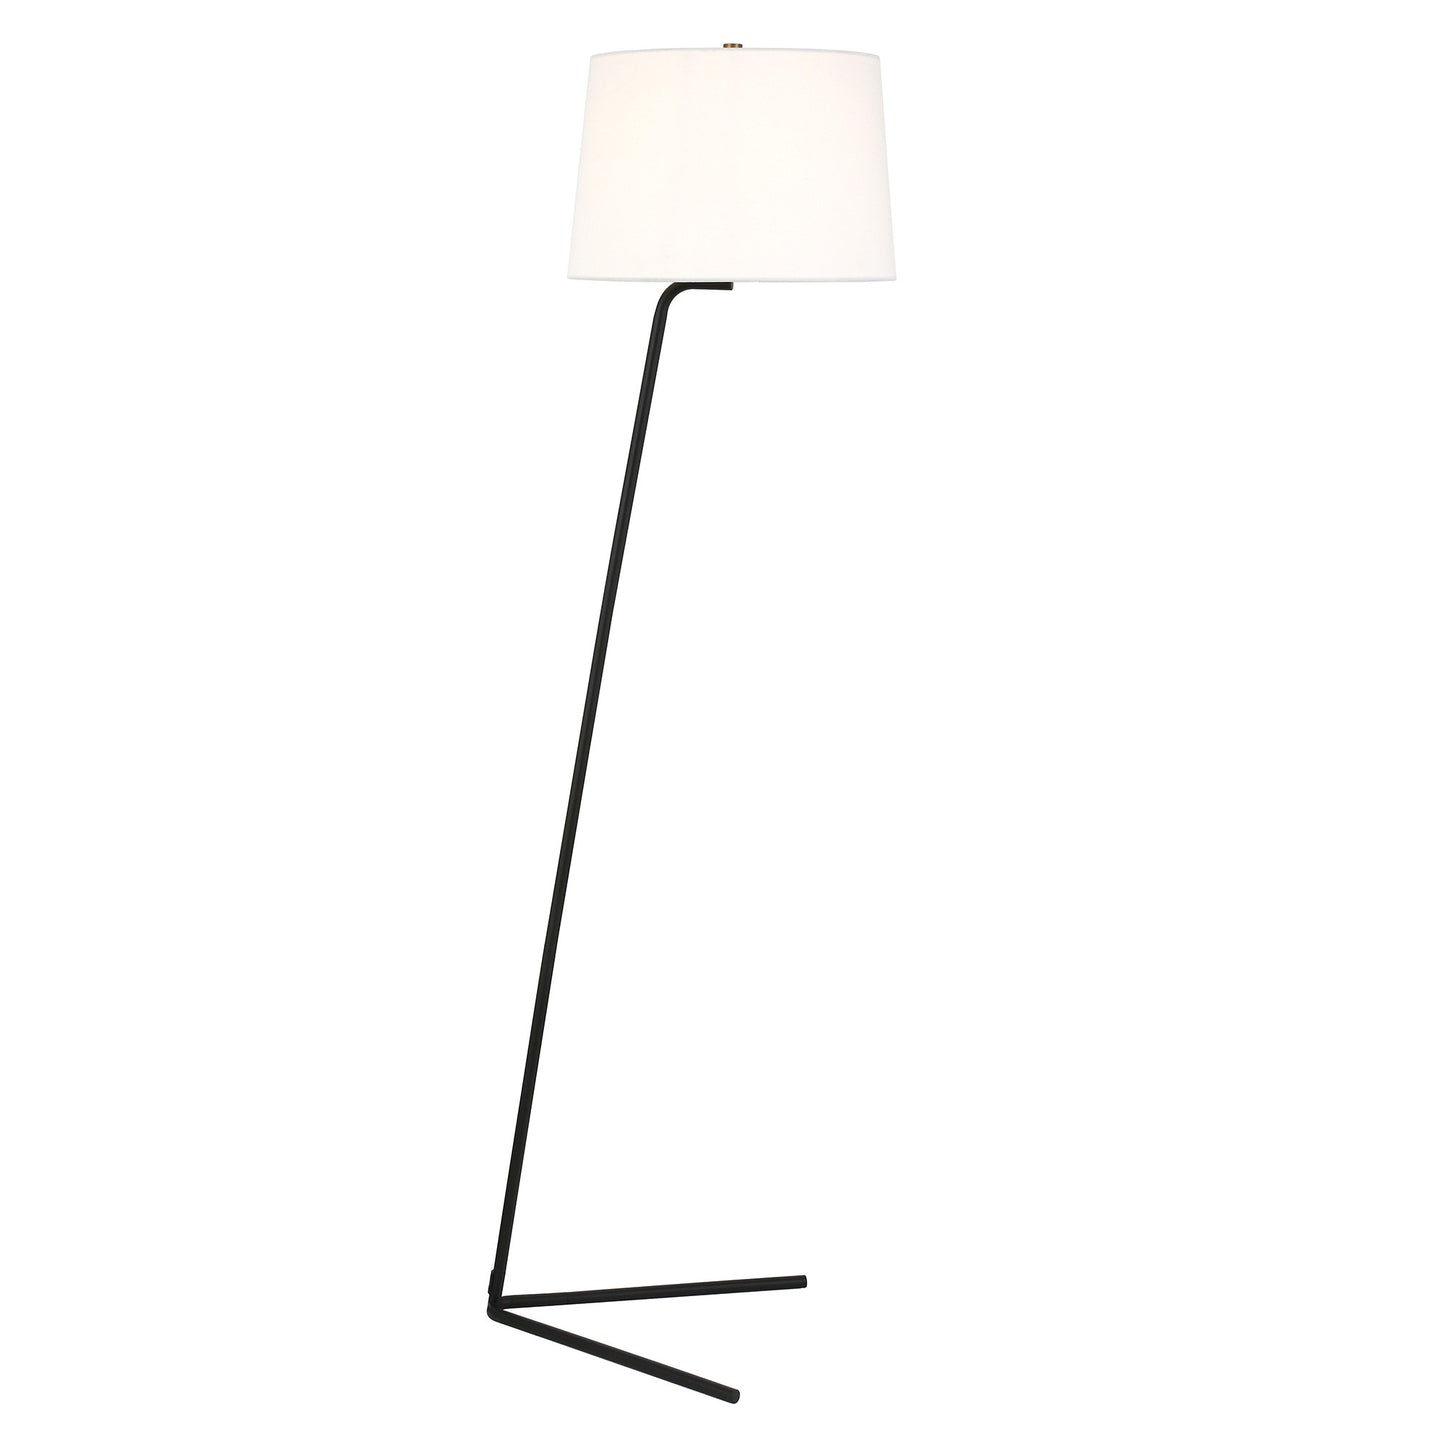 60" Black Novelty Floor Lamp With White Frosted Glass Drum Shade